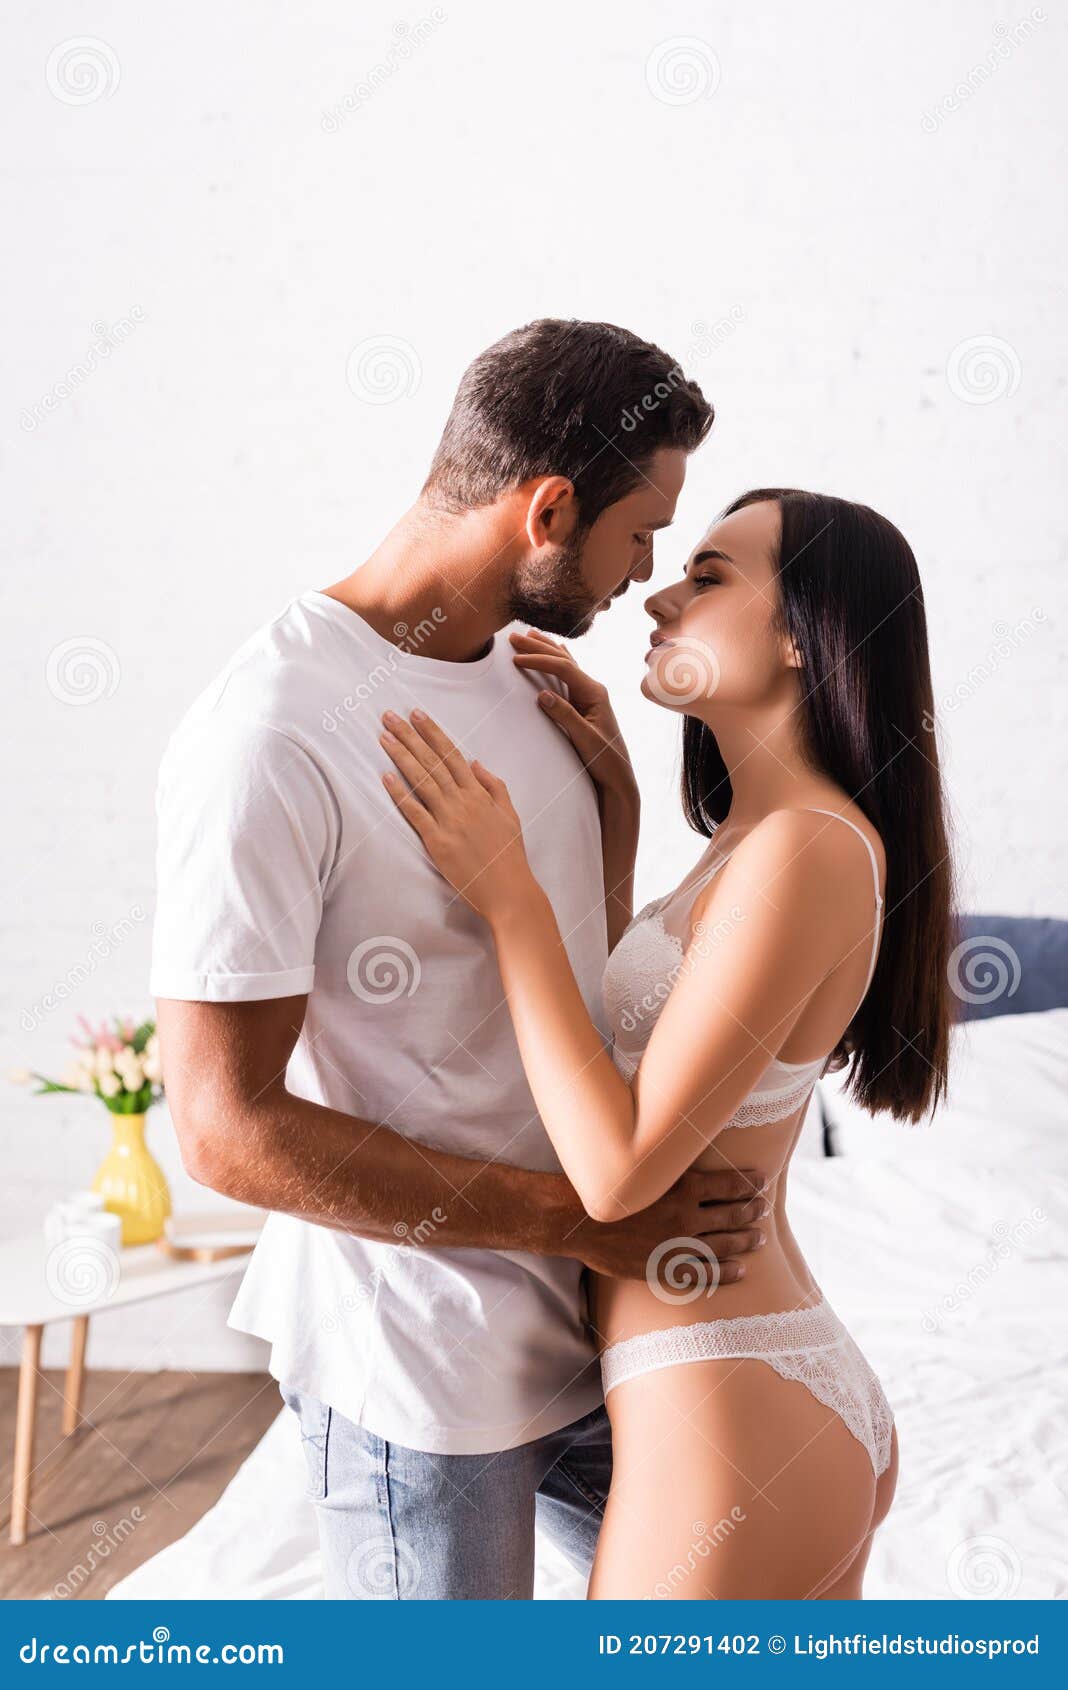 Sensual Young Brunette Woman with Man Stock Photo